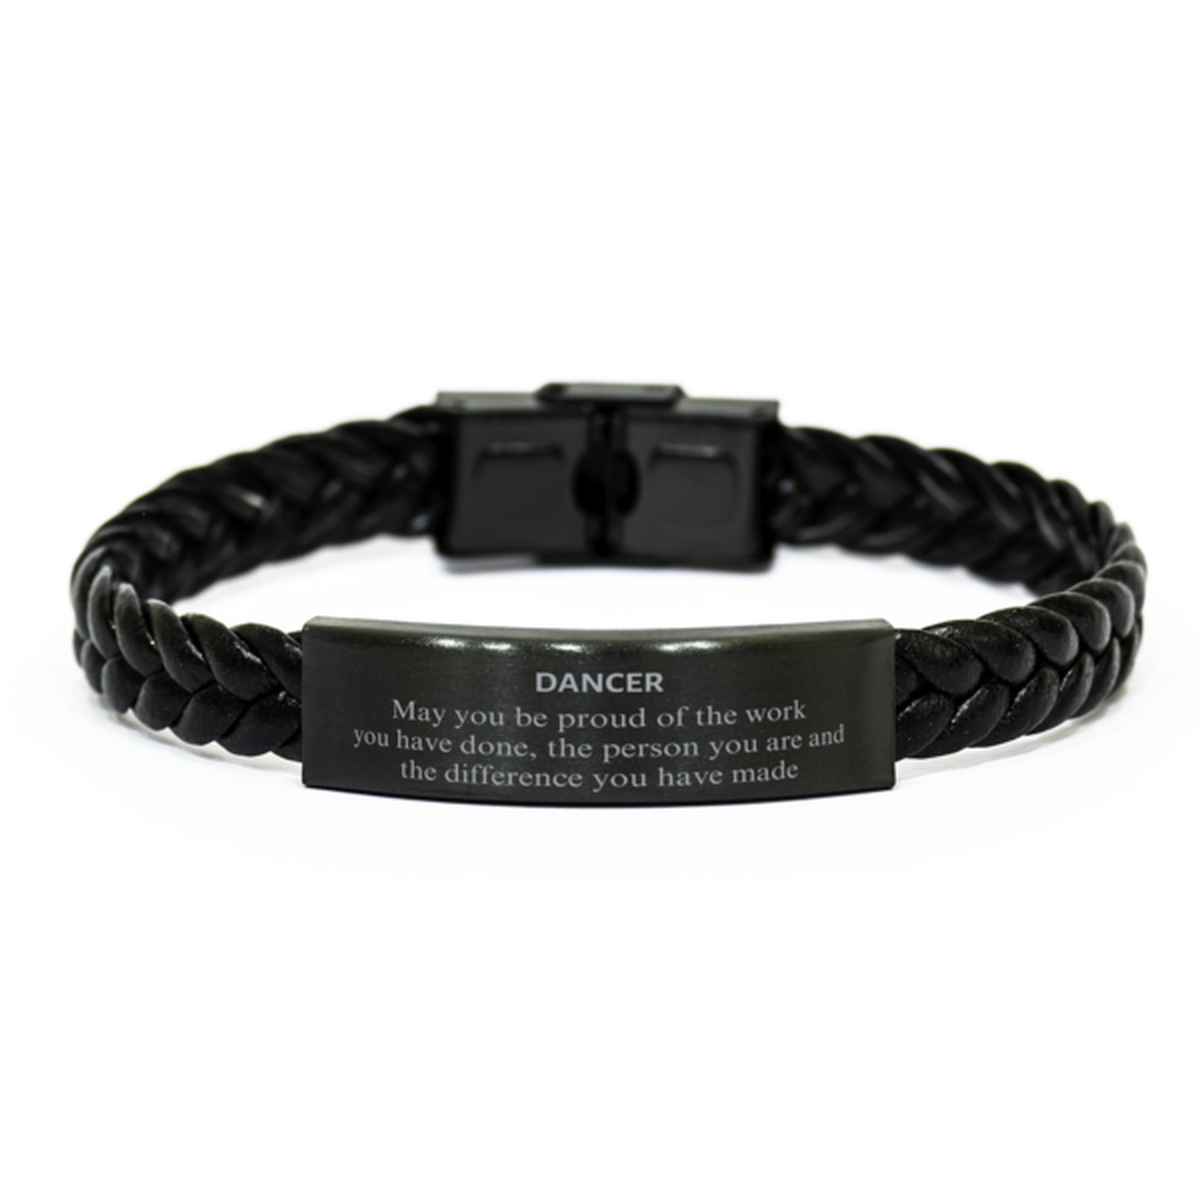 Dancer May you be proud of the work you have done, Retirement Dancer Braided Leather Bracelet for Colleague Appreciation Gifts Amazing for Dancer